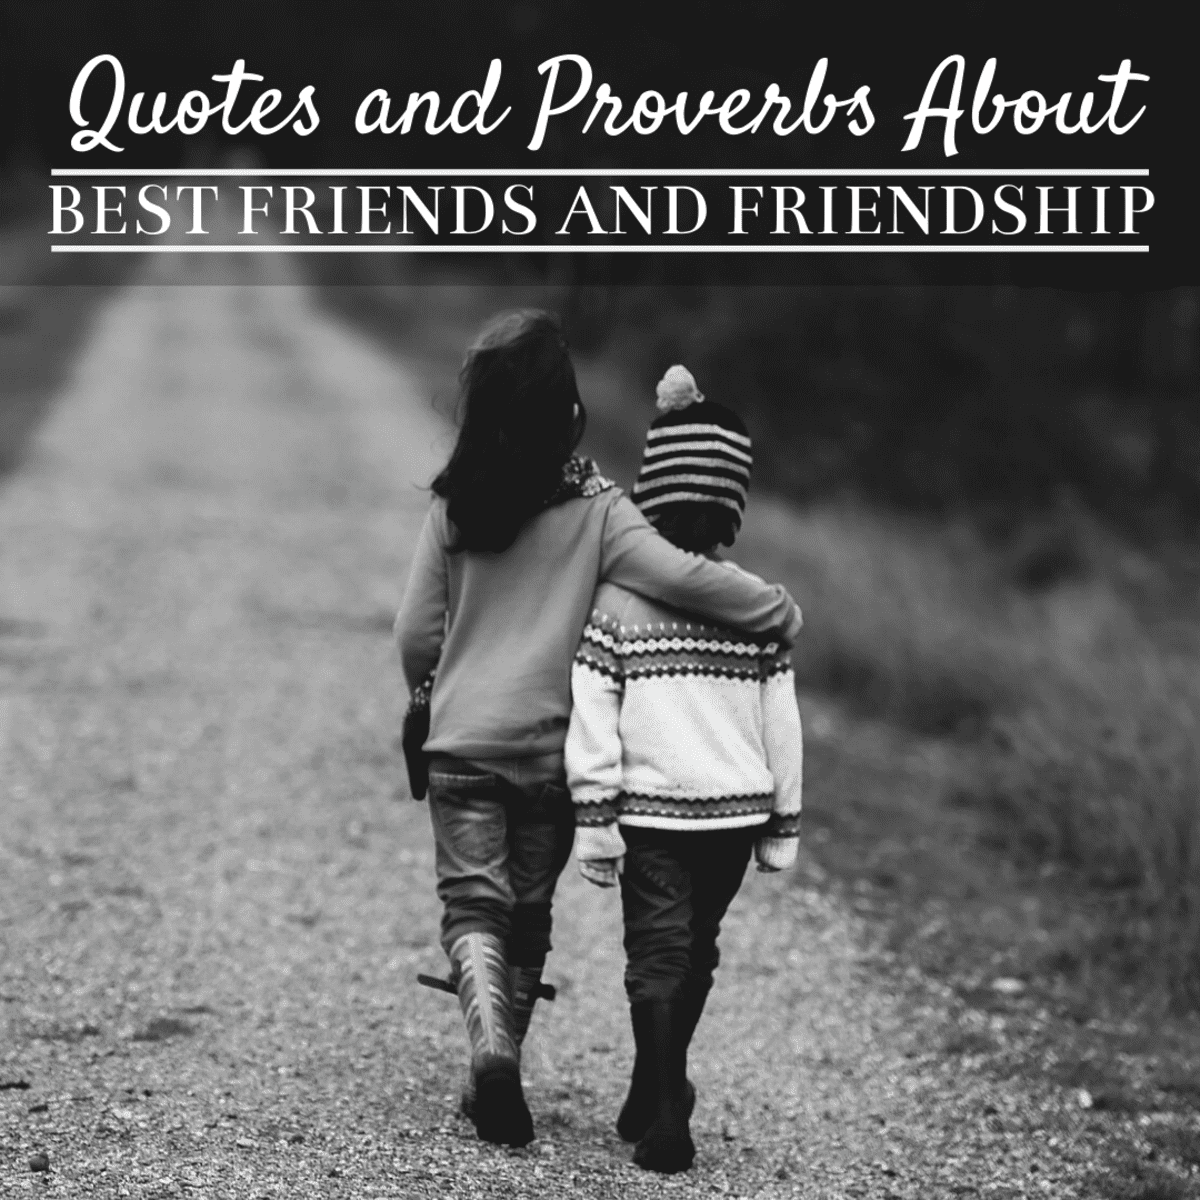 Best Friends: Quotes, Sayings, and Proverbs About Friendship - Holidappy